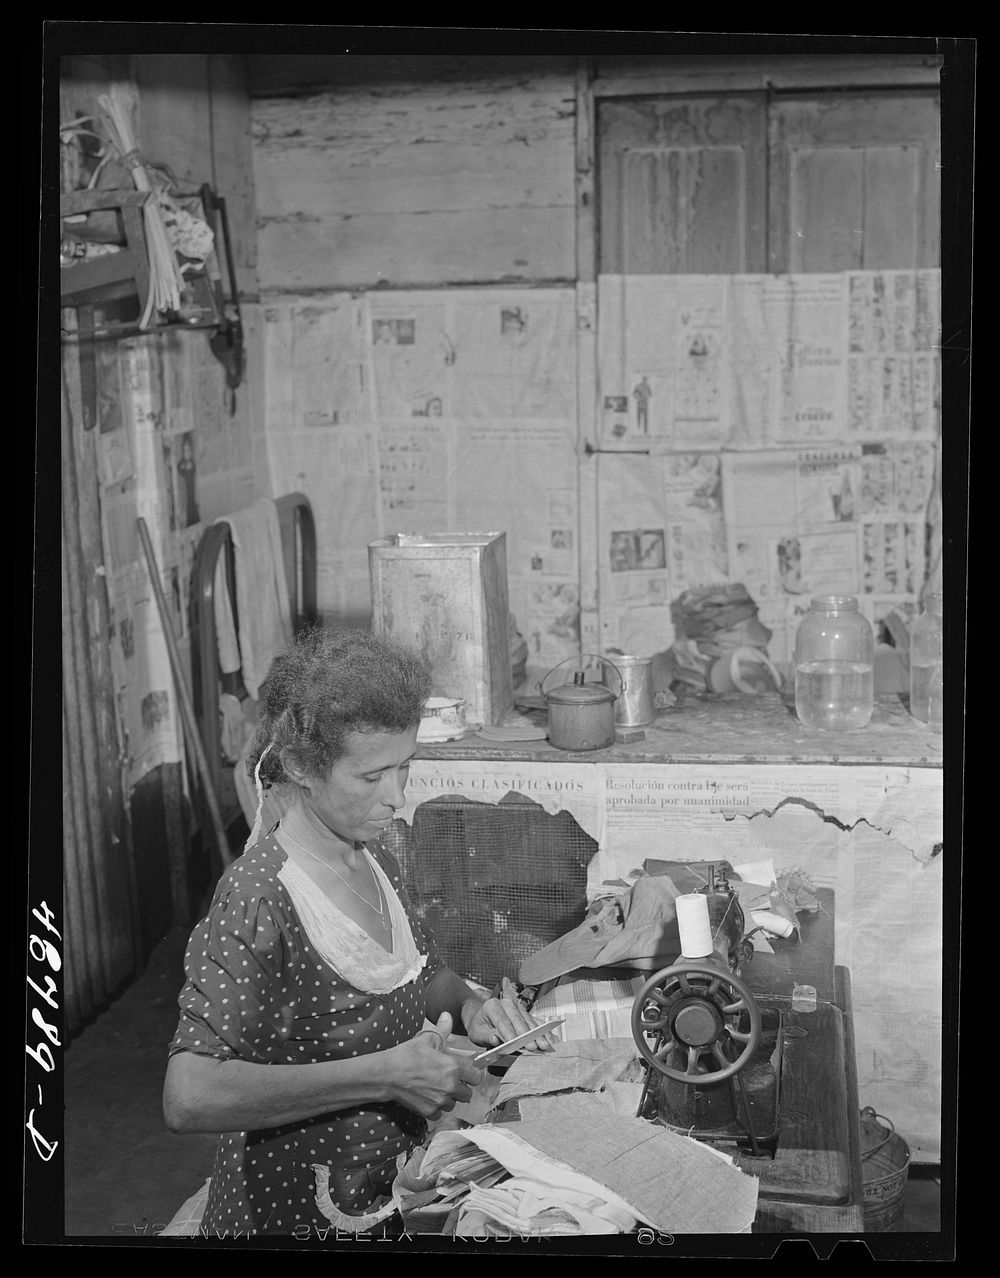 Bayamon, Puerto Rico. Needle work in a small work-shop. Sourced from the Library of Congress.